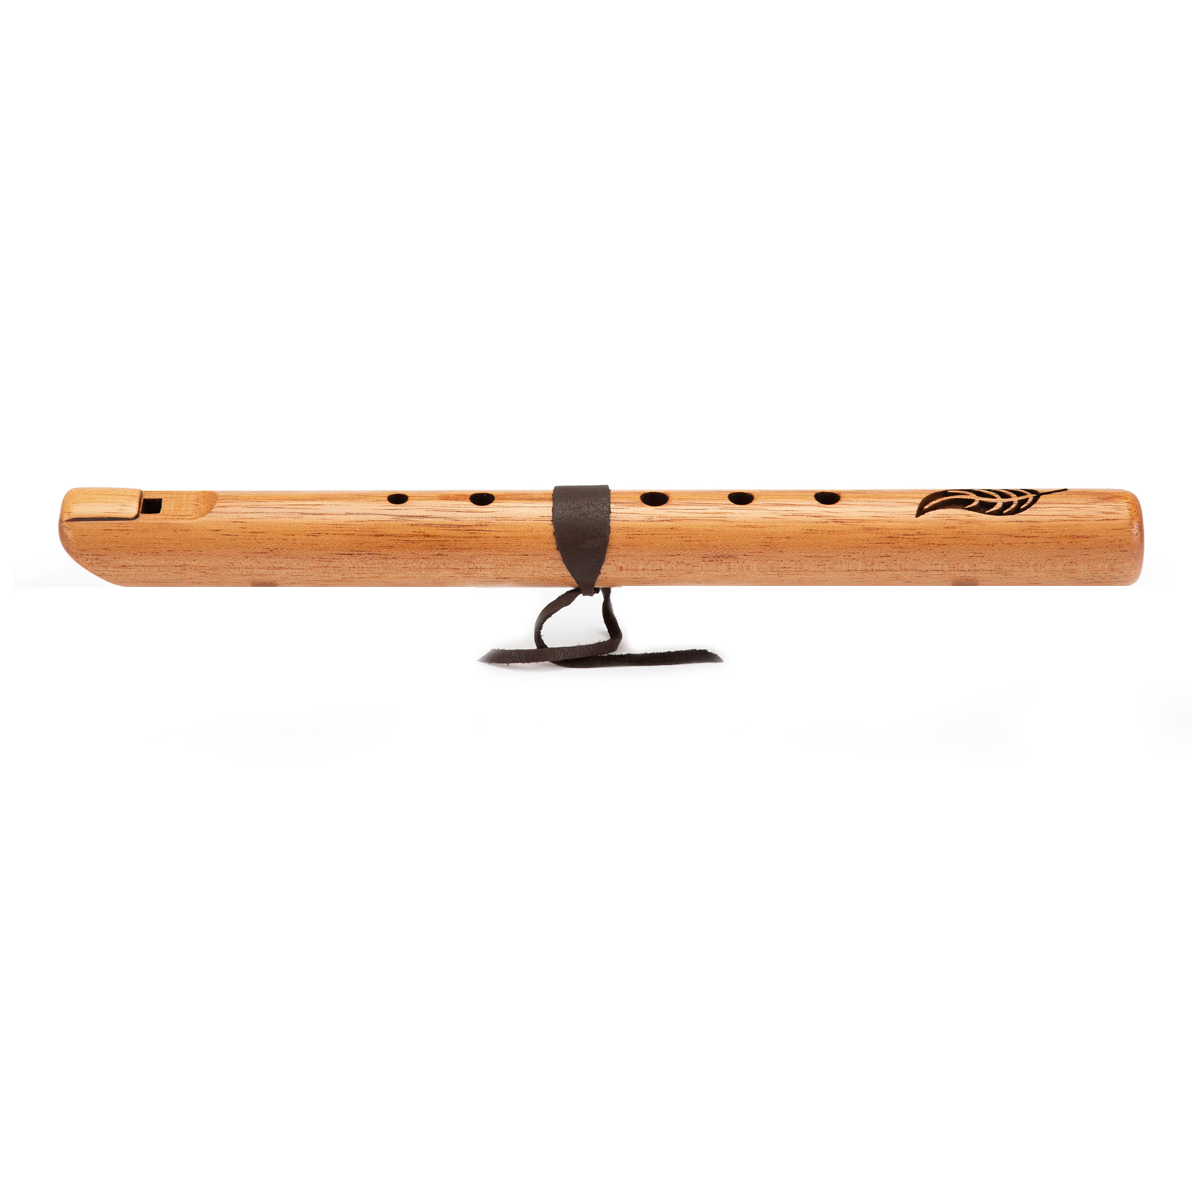 Son of drum -  Spirit Flute Traditional - A